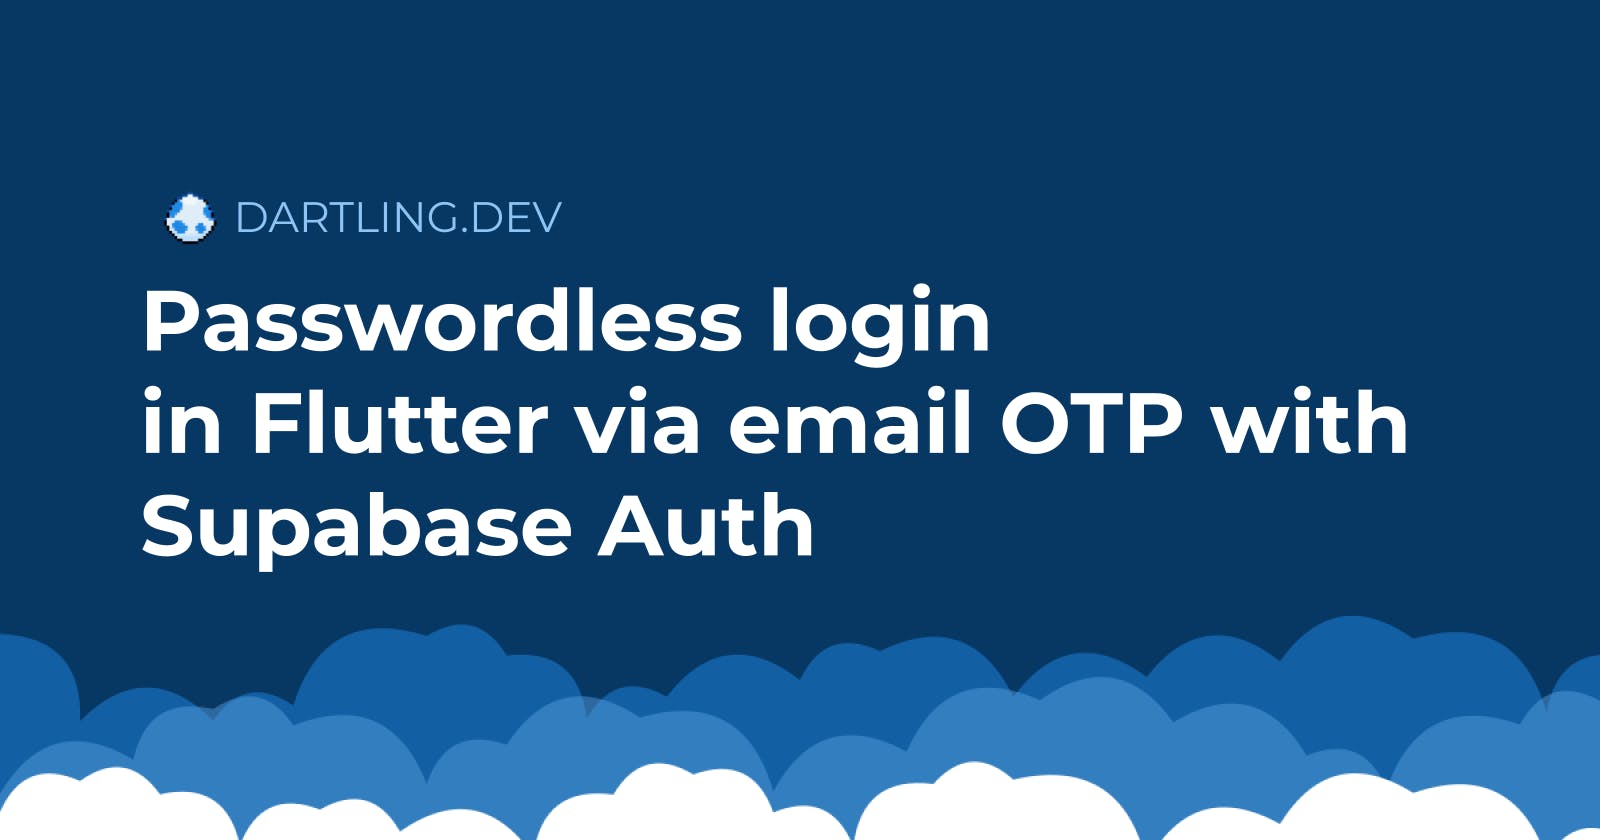 Passwordless login in Flutter via email OTP with Supabase Auth